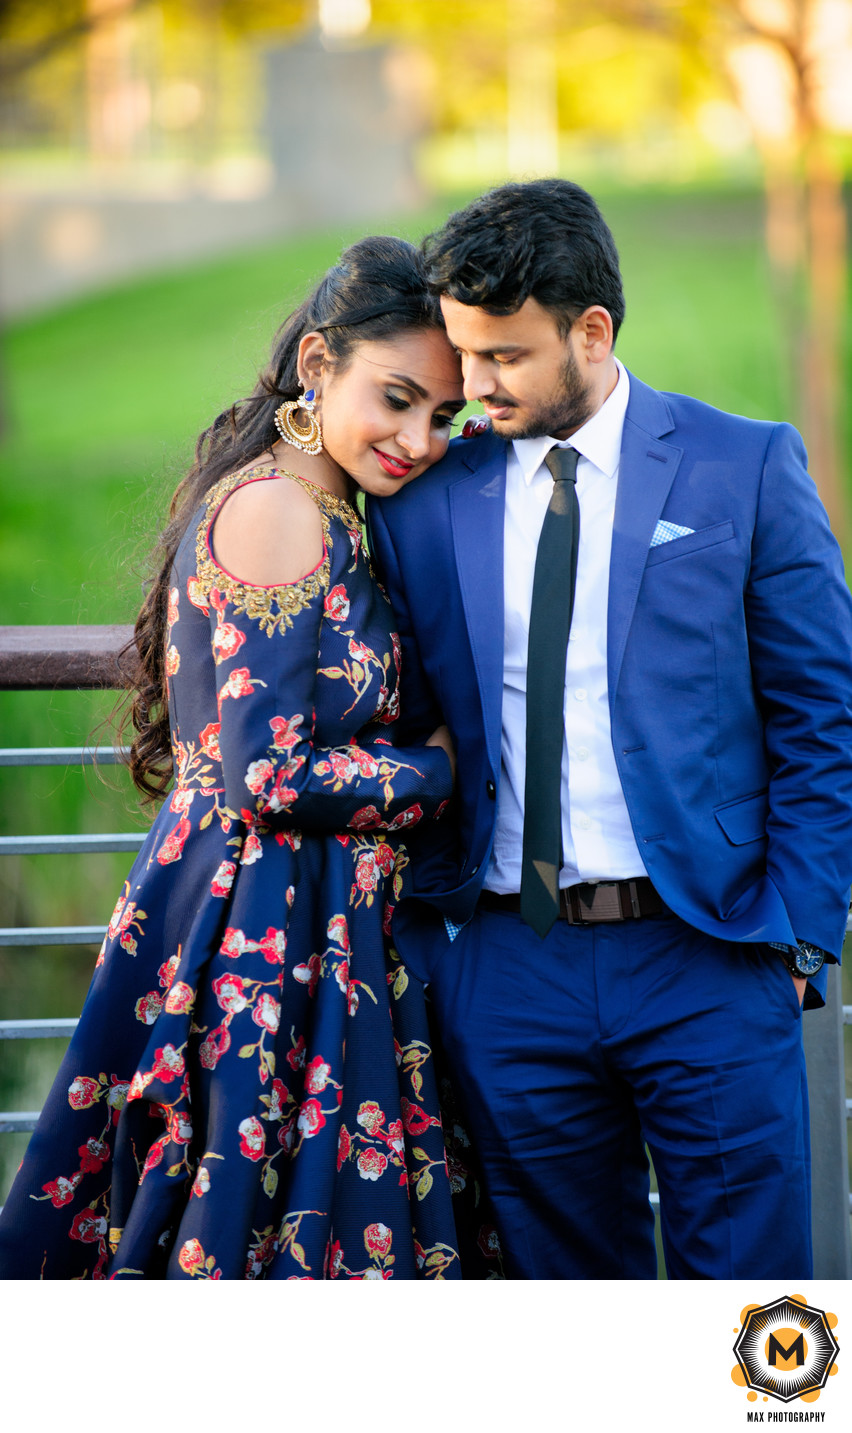 Shared Tender Moment Between Stylish Engaged Couple